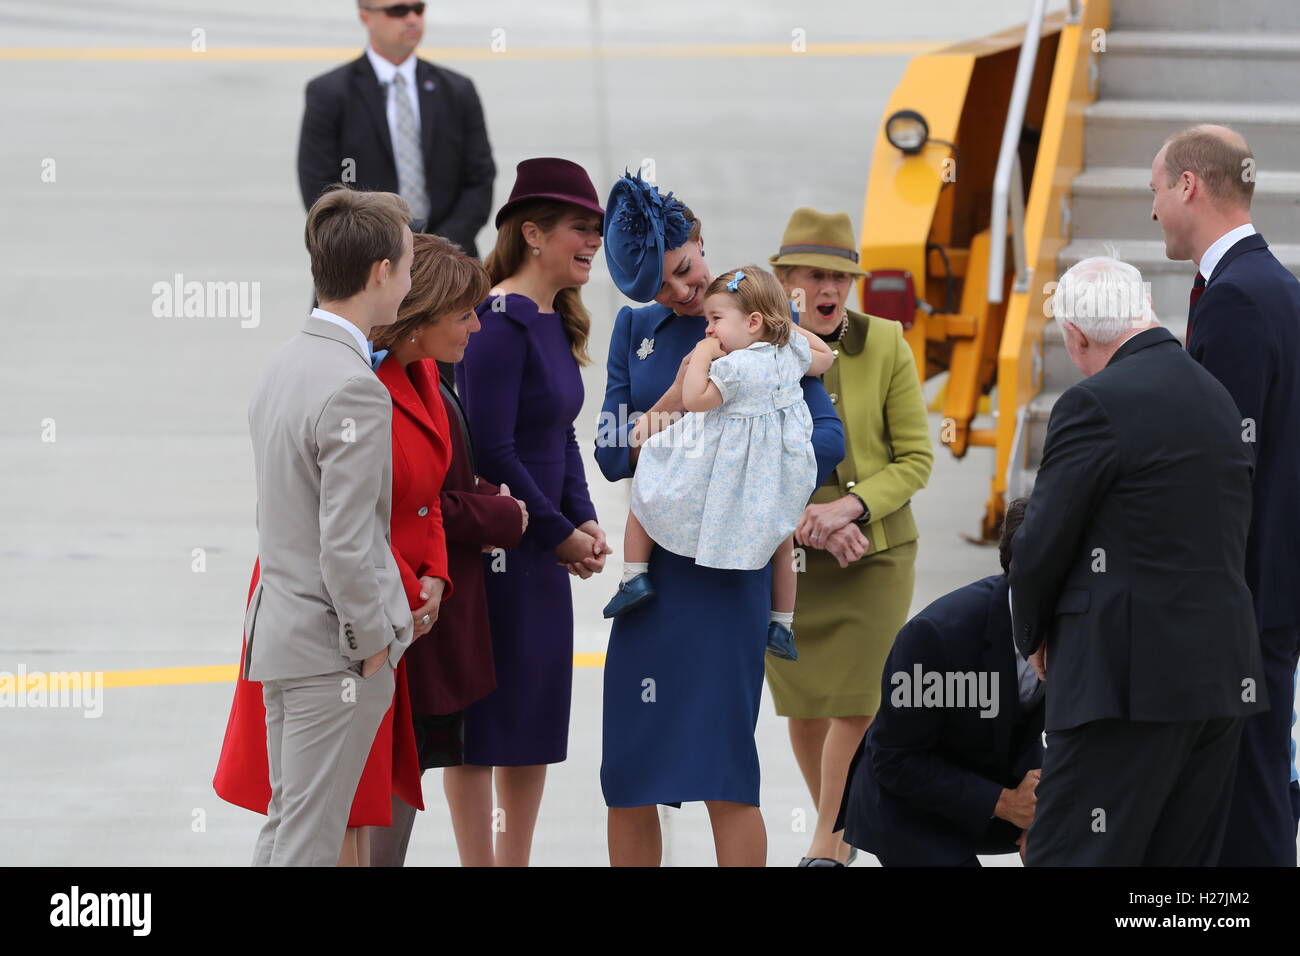 The Prime Minister of Canada Justin Trudeau (centre) and his wife Sophie (fourth left) greet the Duke and Duchess of Cambridge and their children Prince George and Princess Charlotte, as the Royal party arrive at Victoria International Airport, in Victoria, Canada, on the first day of their official tour of Canada. Stock Photo